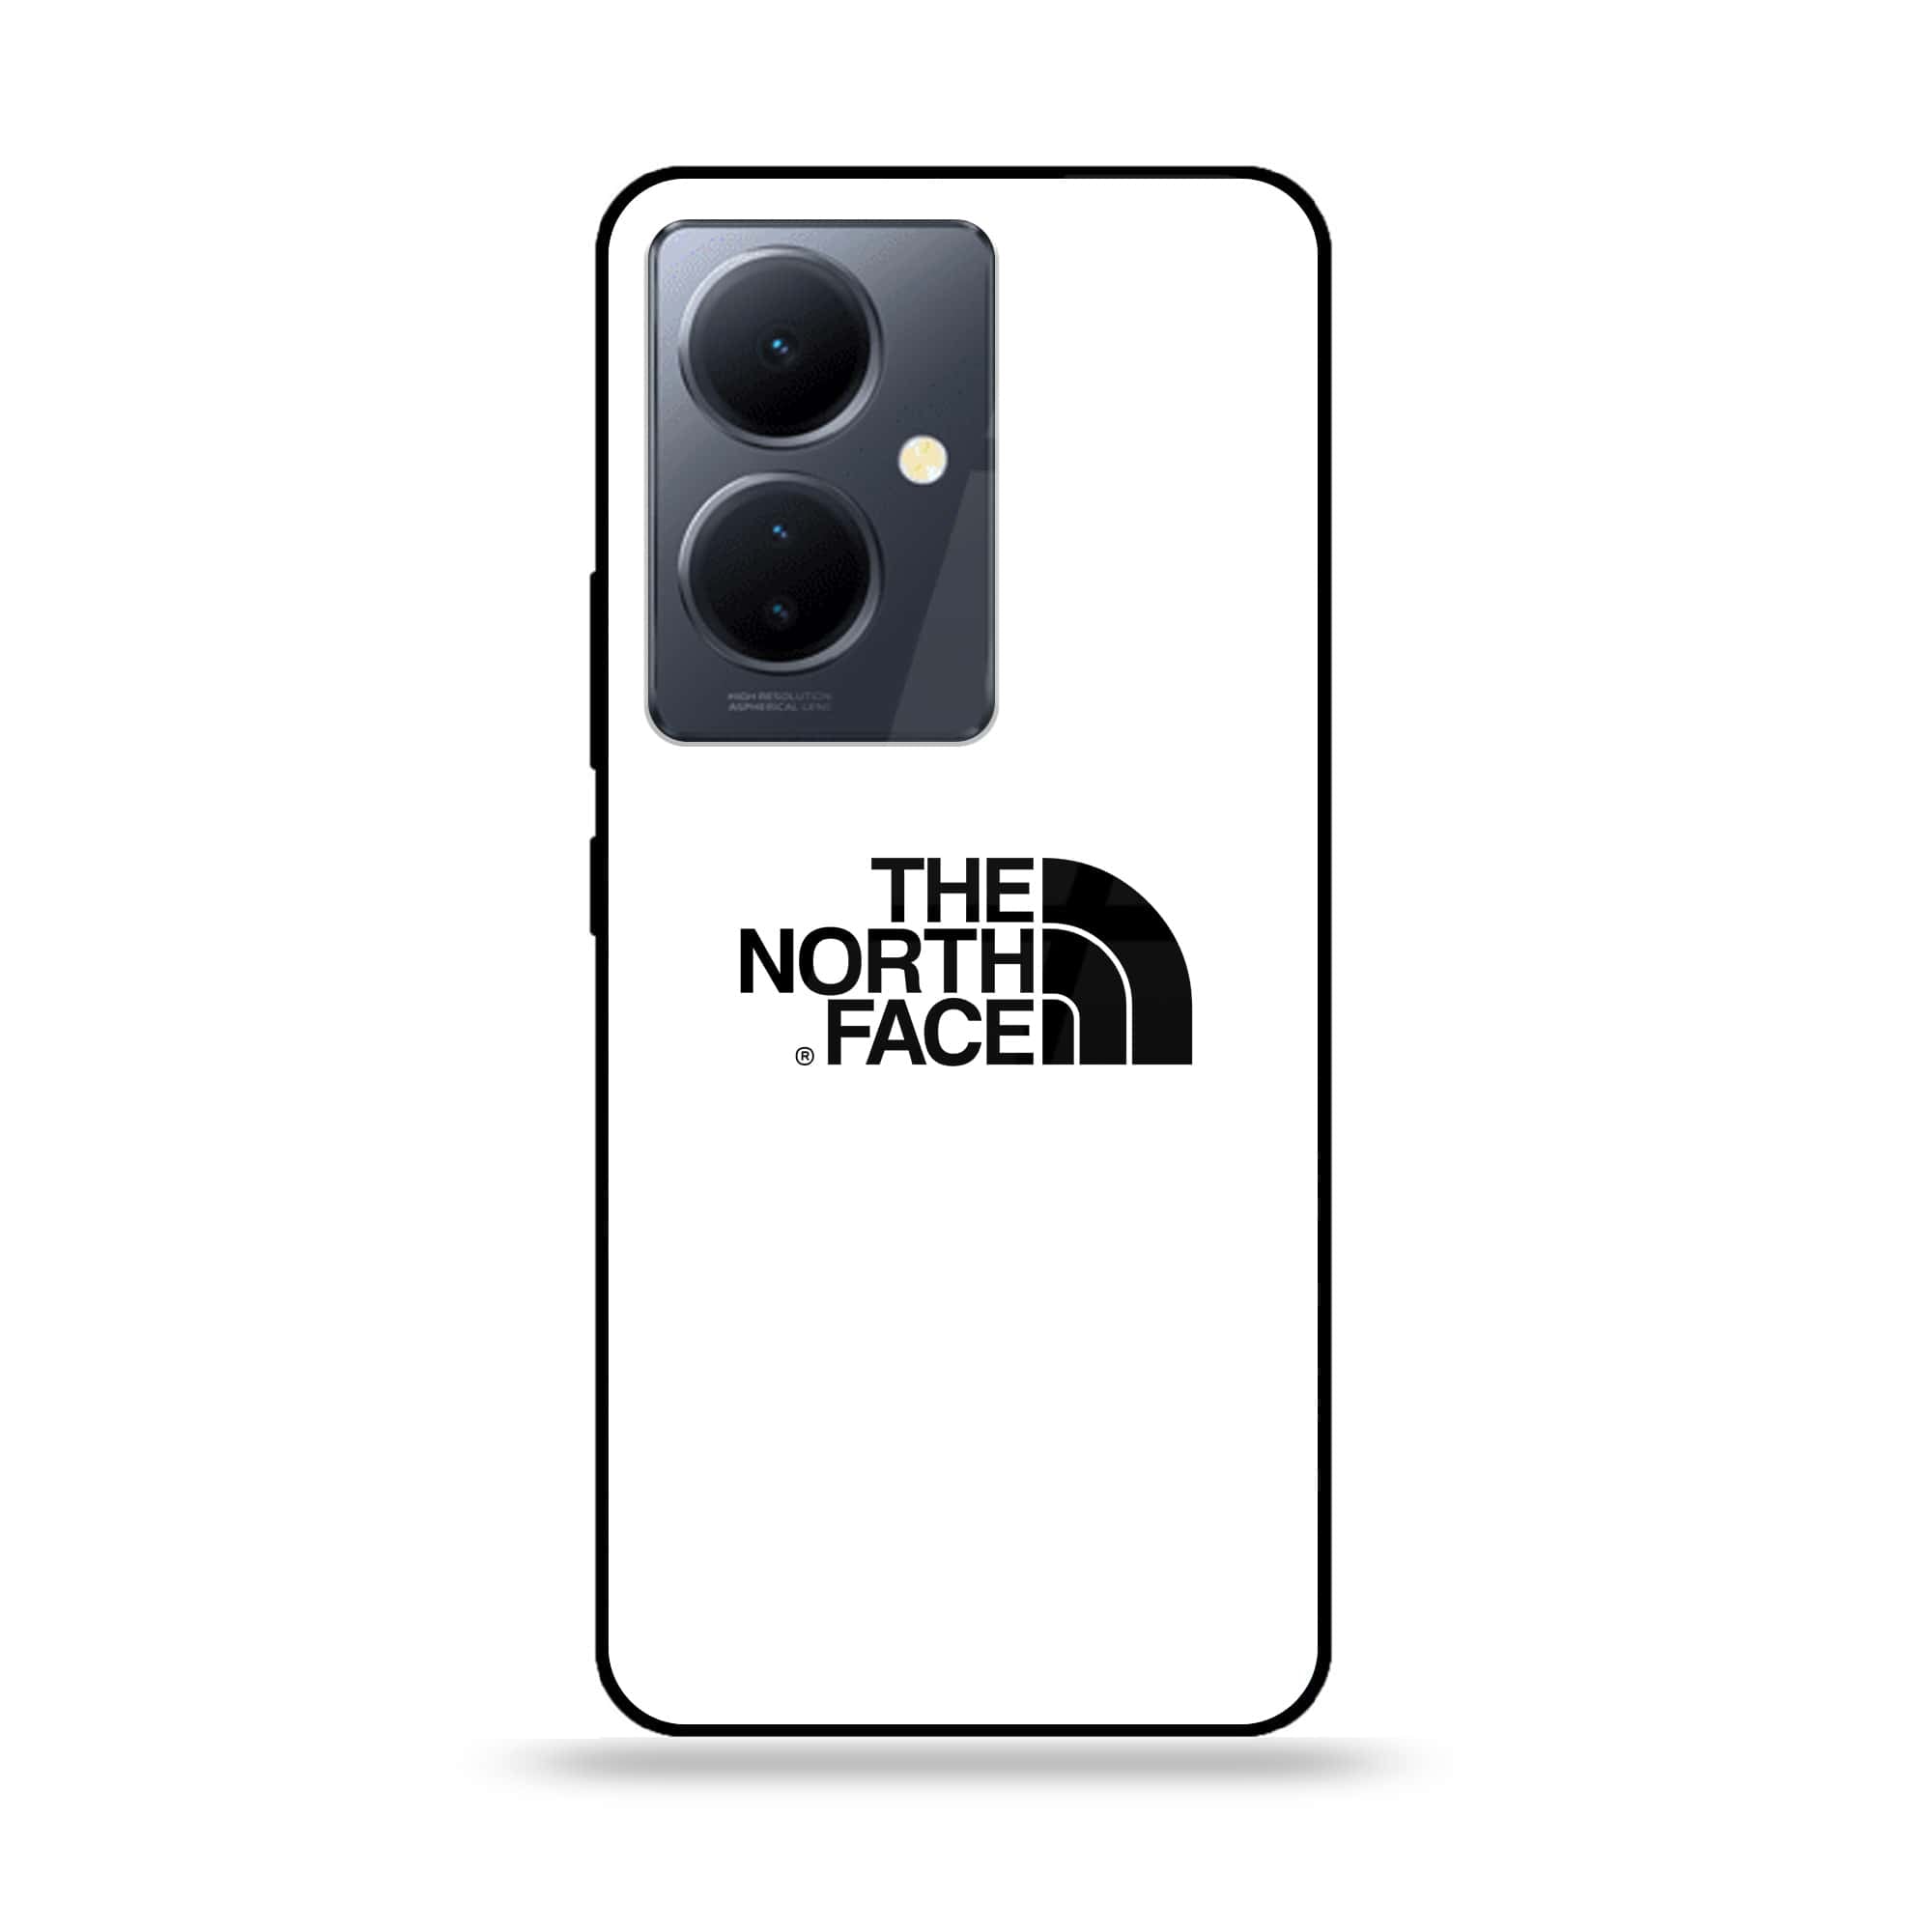 Vivo Y78 - The North Face Series - Premium Printed Glass soft Bumper shock Proof Case